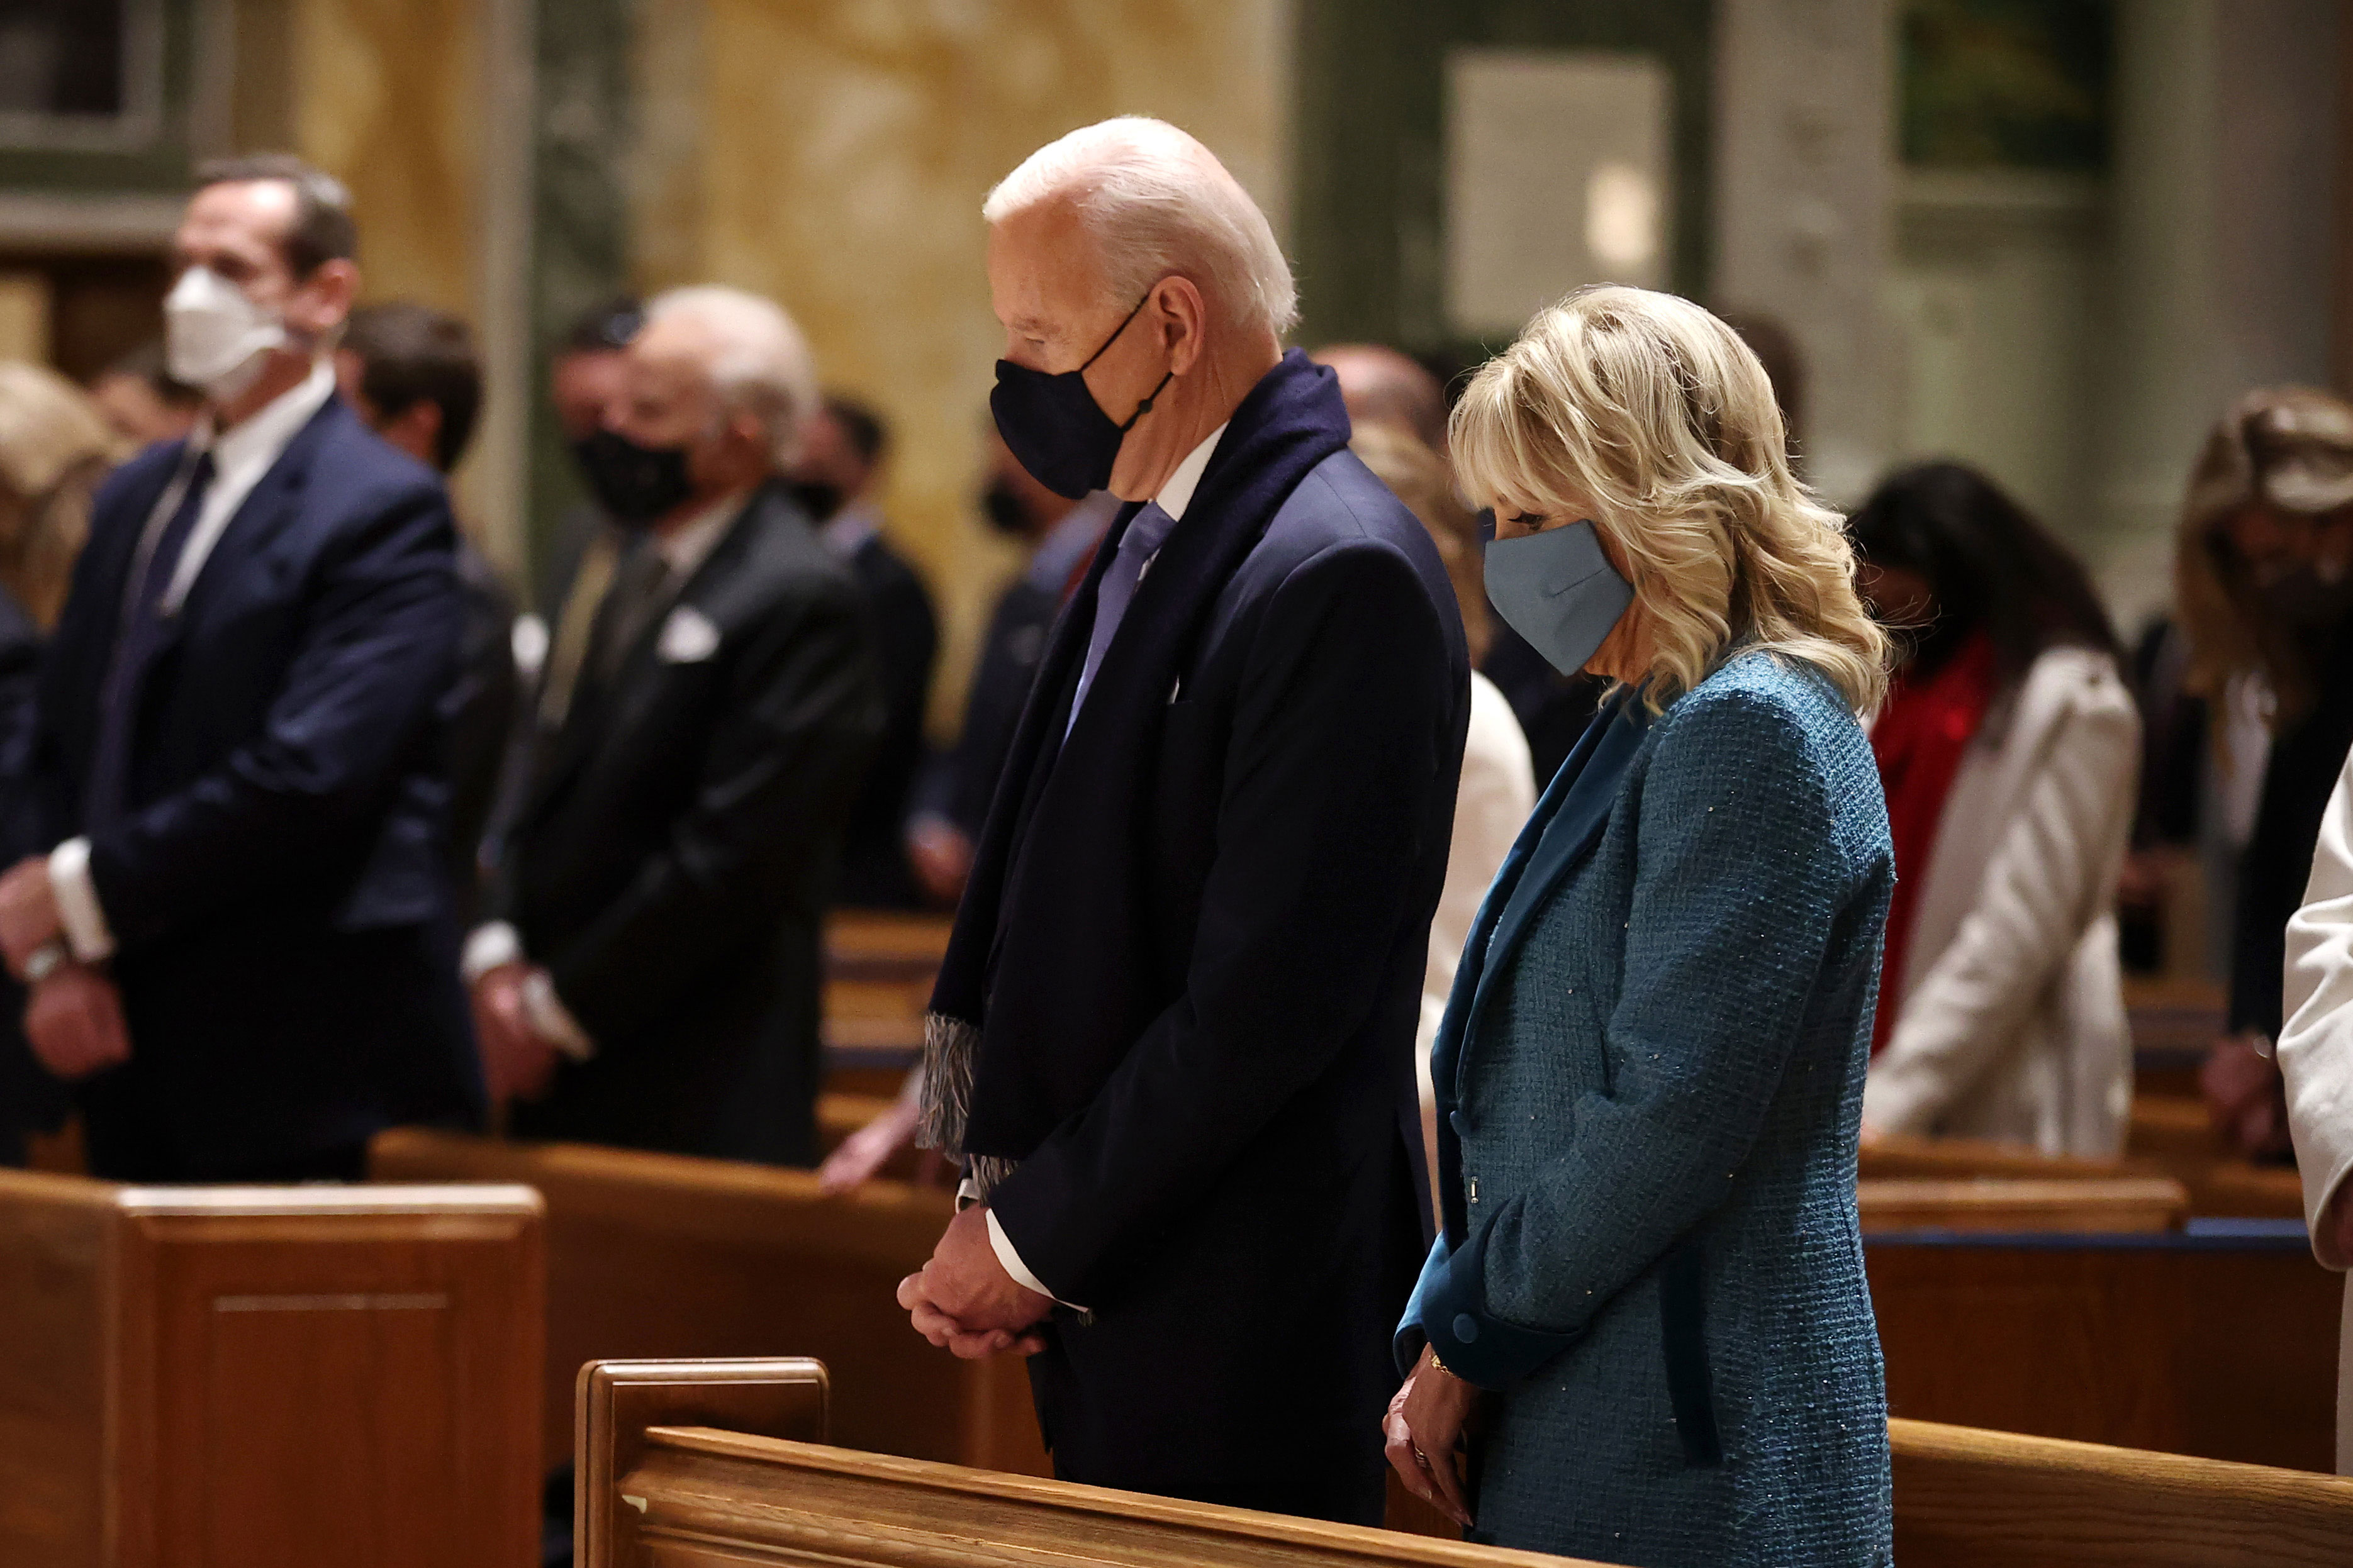 President-elect Joe Biden and Jill Biden attend mass at the Cathedral of St. Matthew the Apostle in Washington, DC, with congressional leaders on January 20.